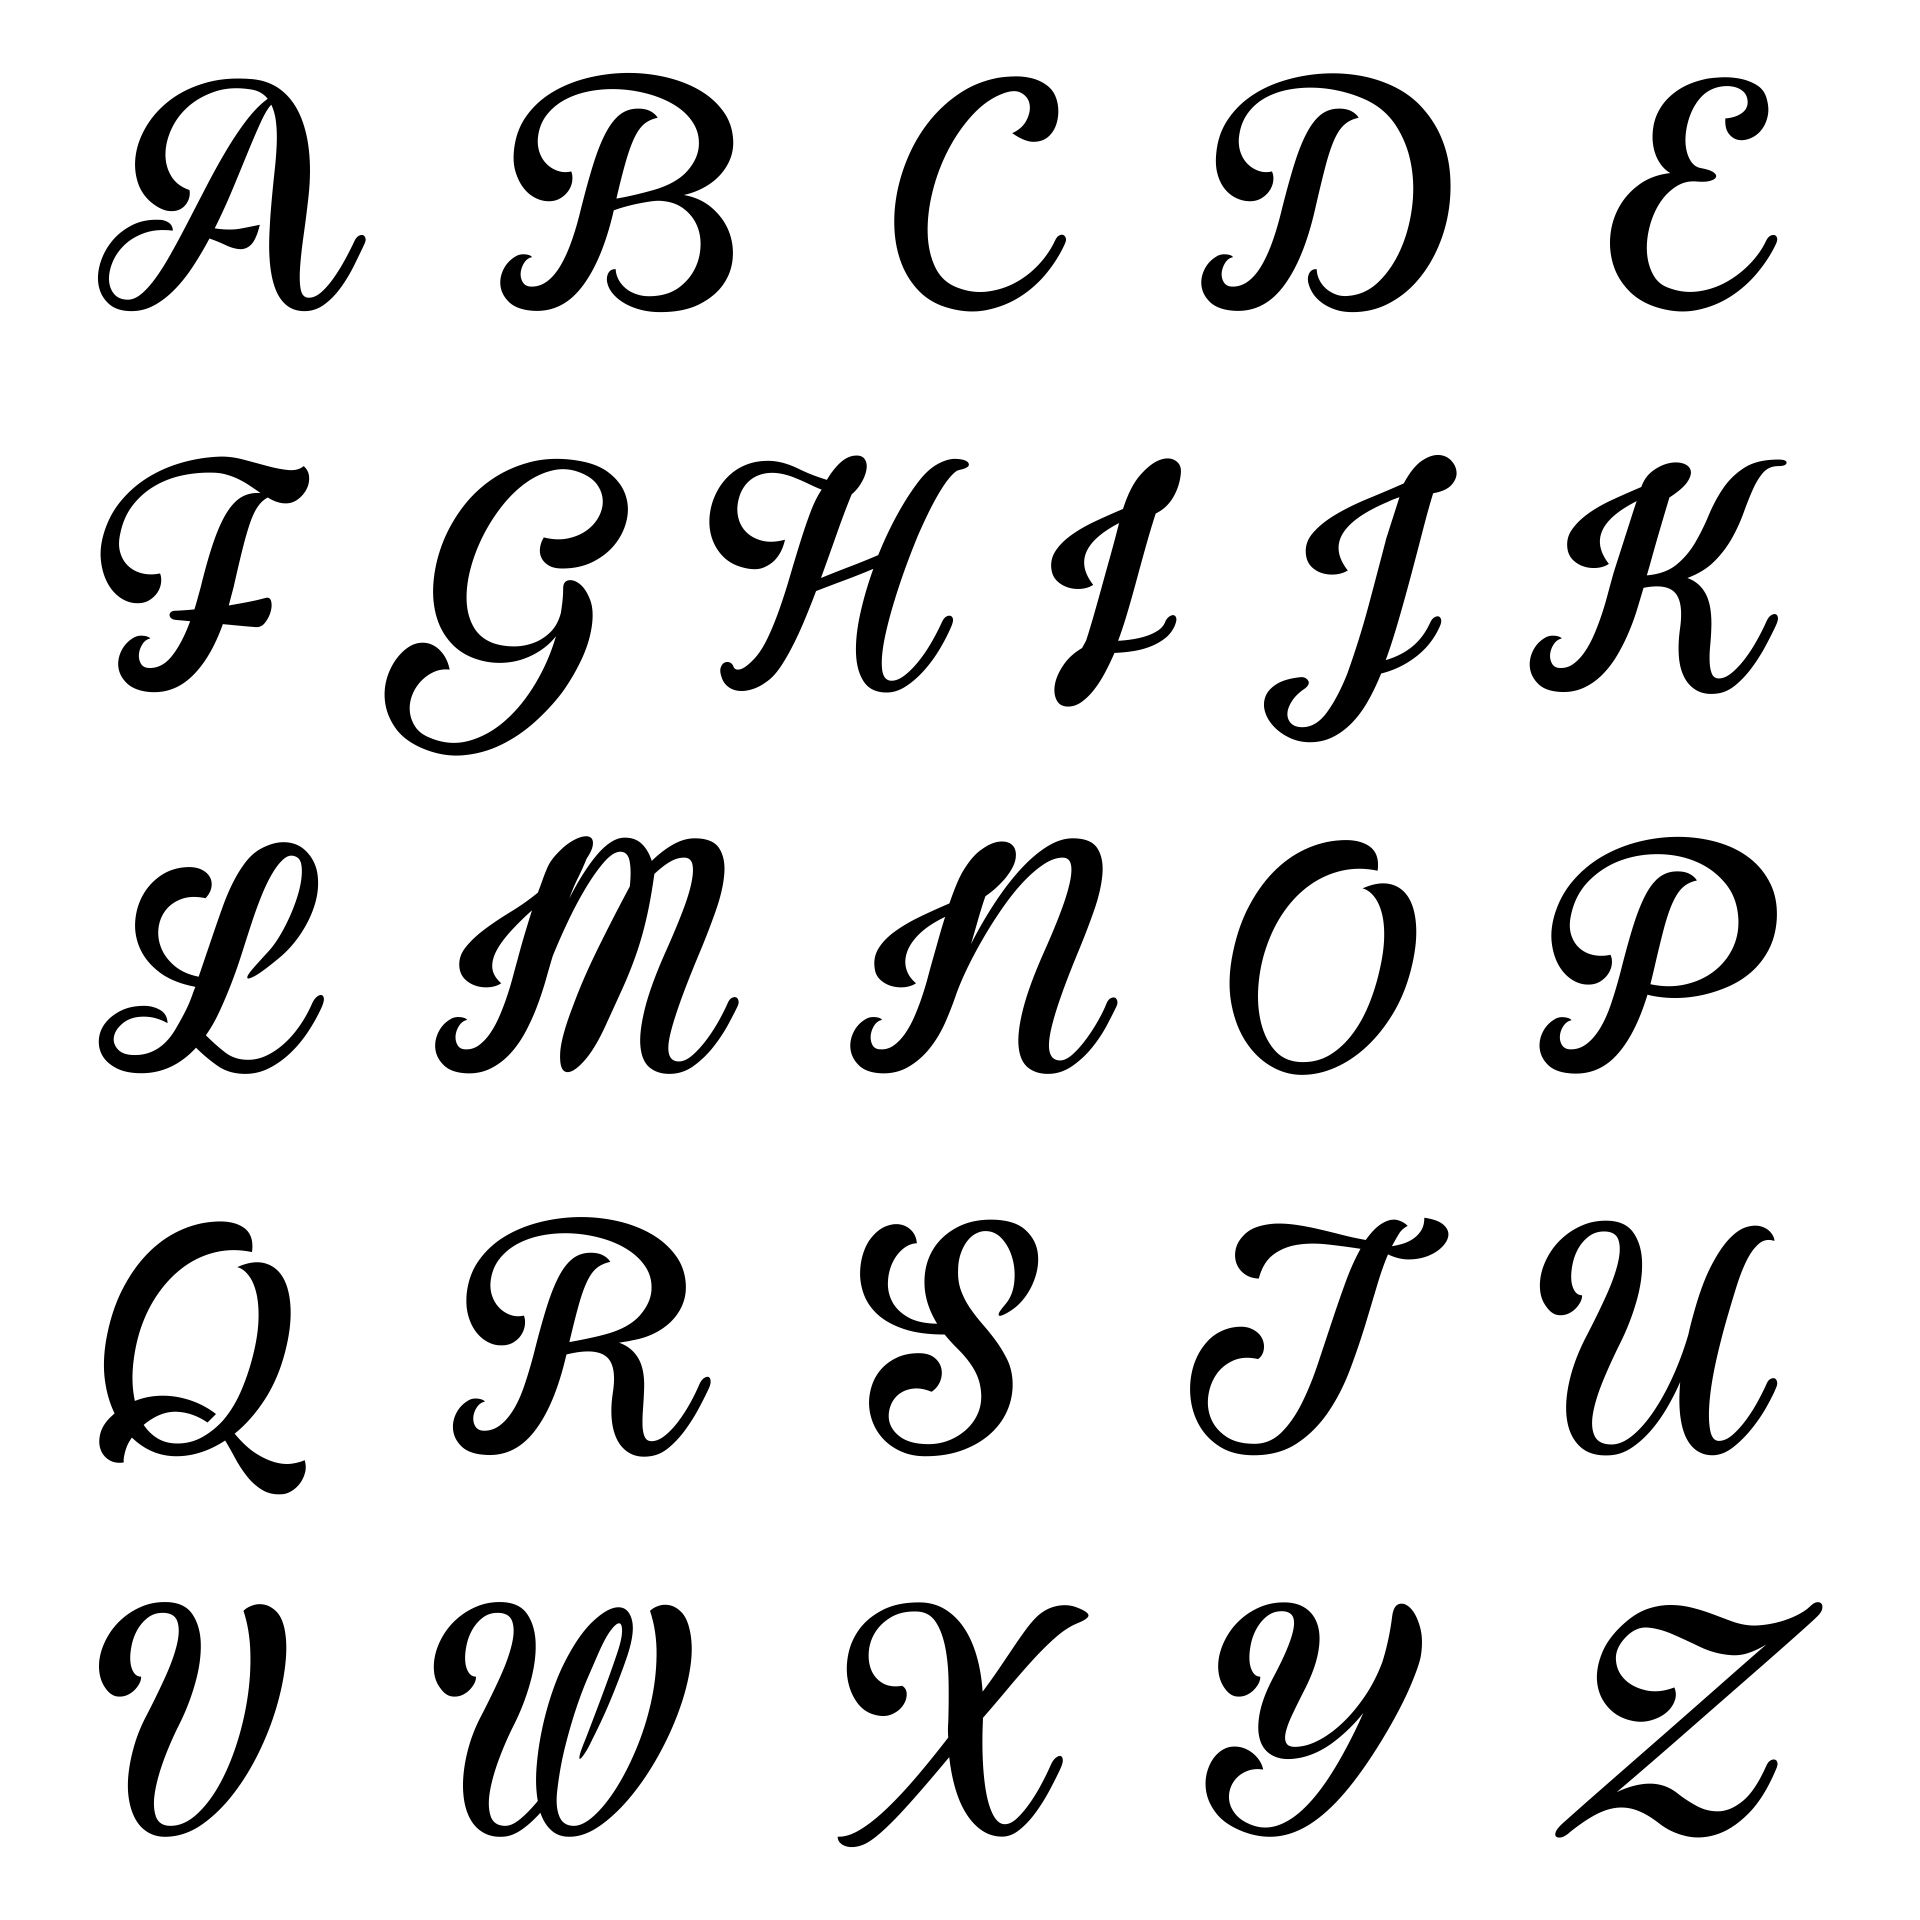 10 Best Fancy Letter Stencils Free Printable PDF for Free at Printablee